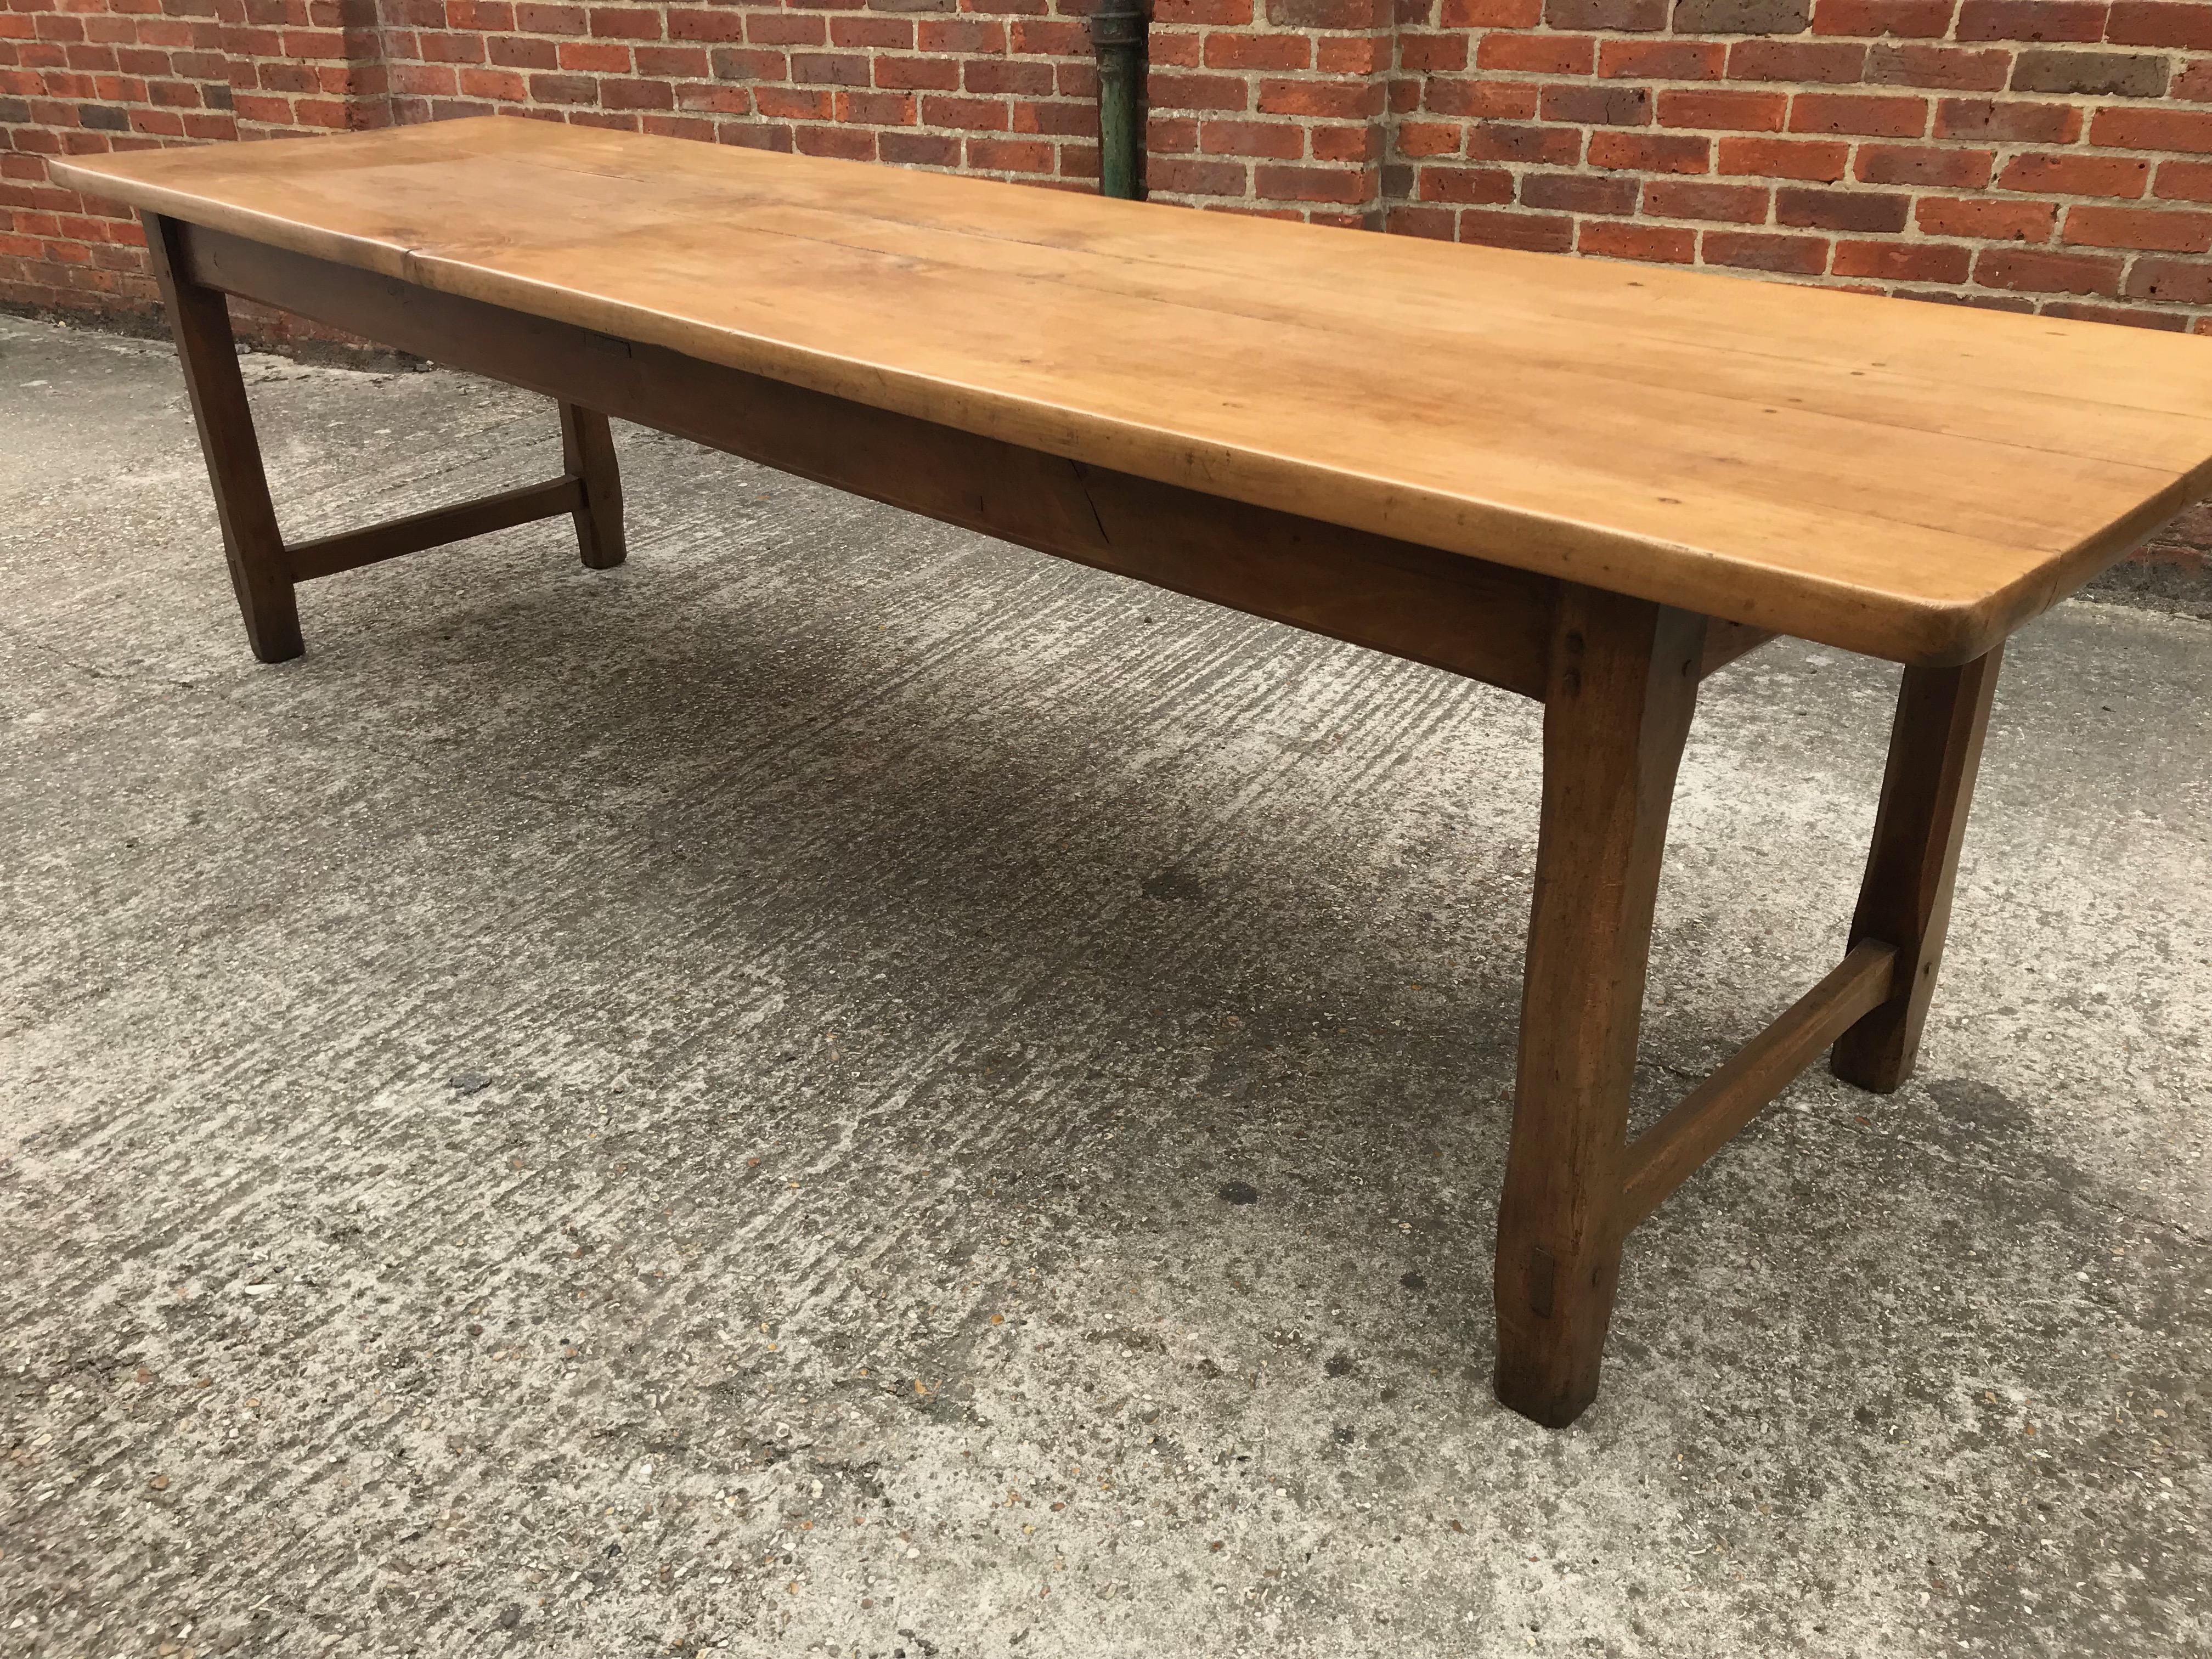 Beech French farmhouse table. Large 3m beech French farmhouse table, with very sturdy base and legs. Glorious colour with a thick top. Very comfortable 12 seater with good leg room. Sturdy base with good proportions. Gorgeous top and